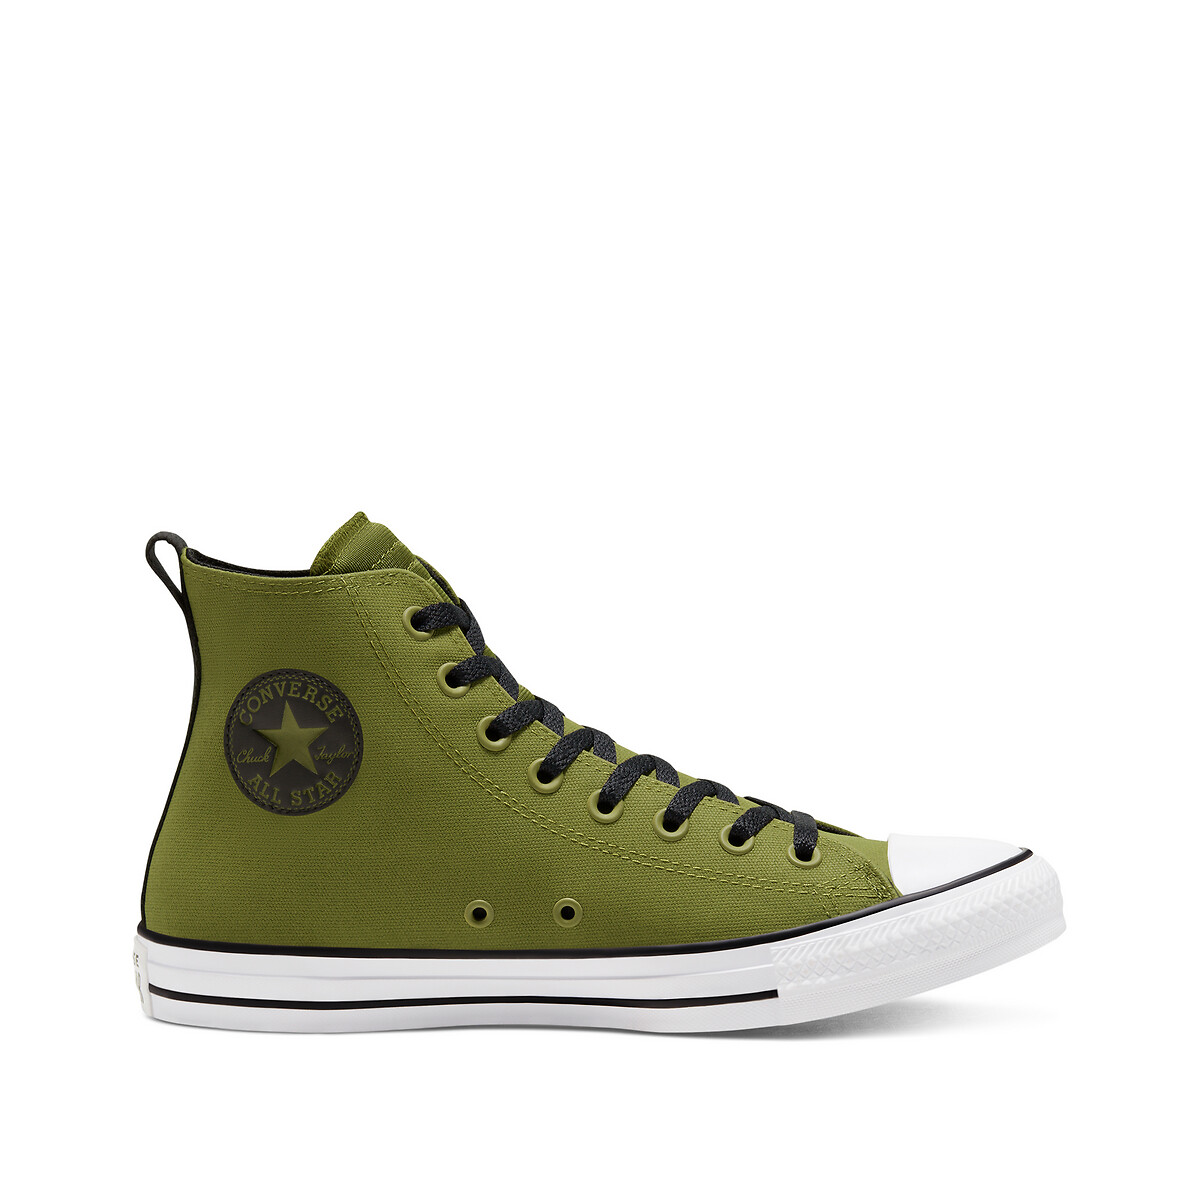 Chuck taylor all star leather trainers 